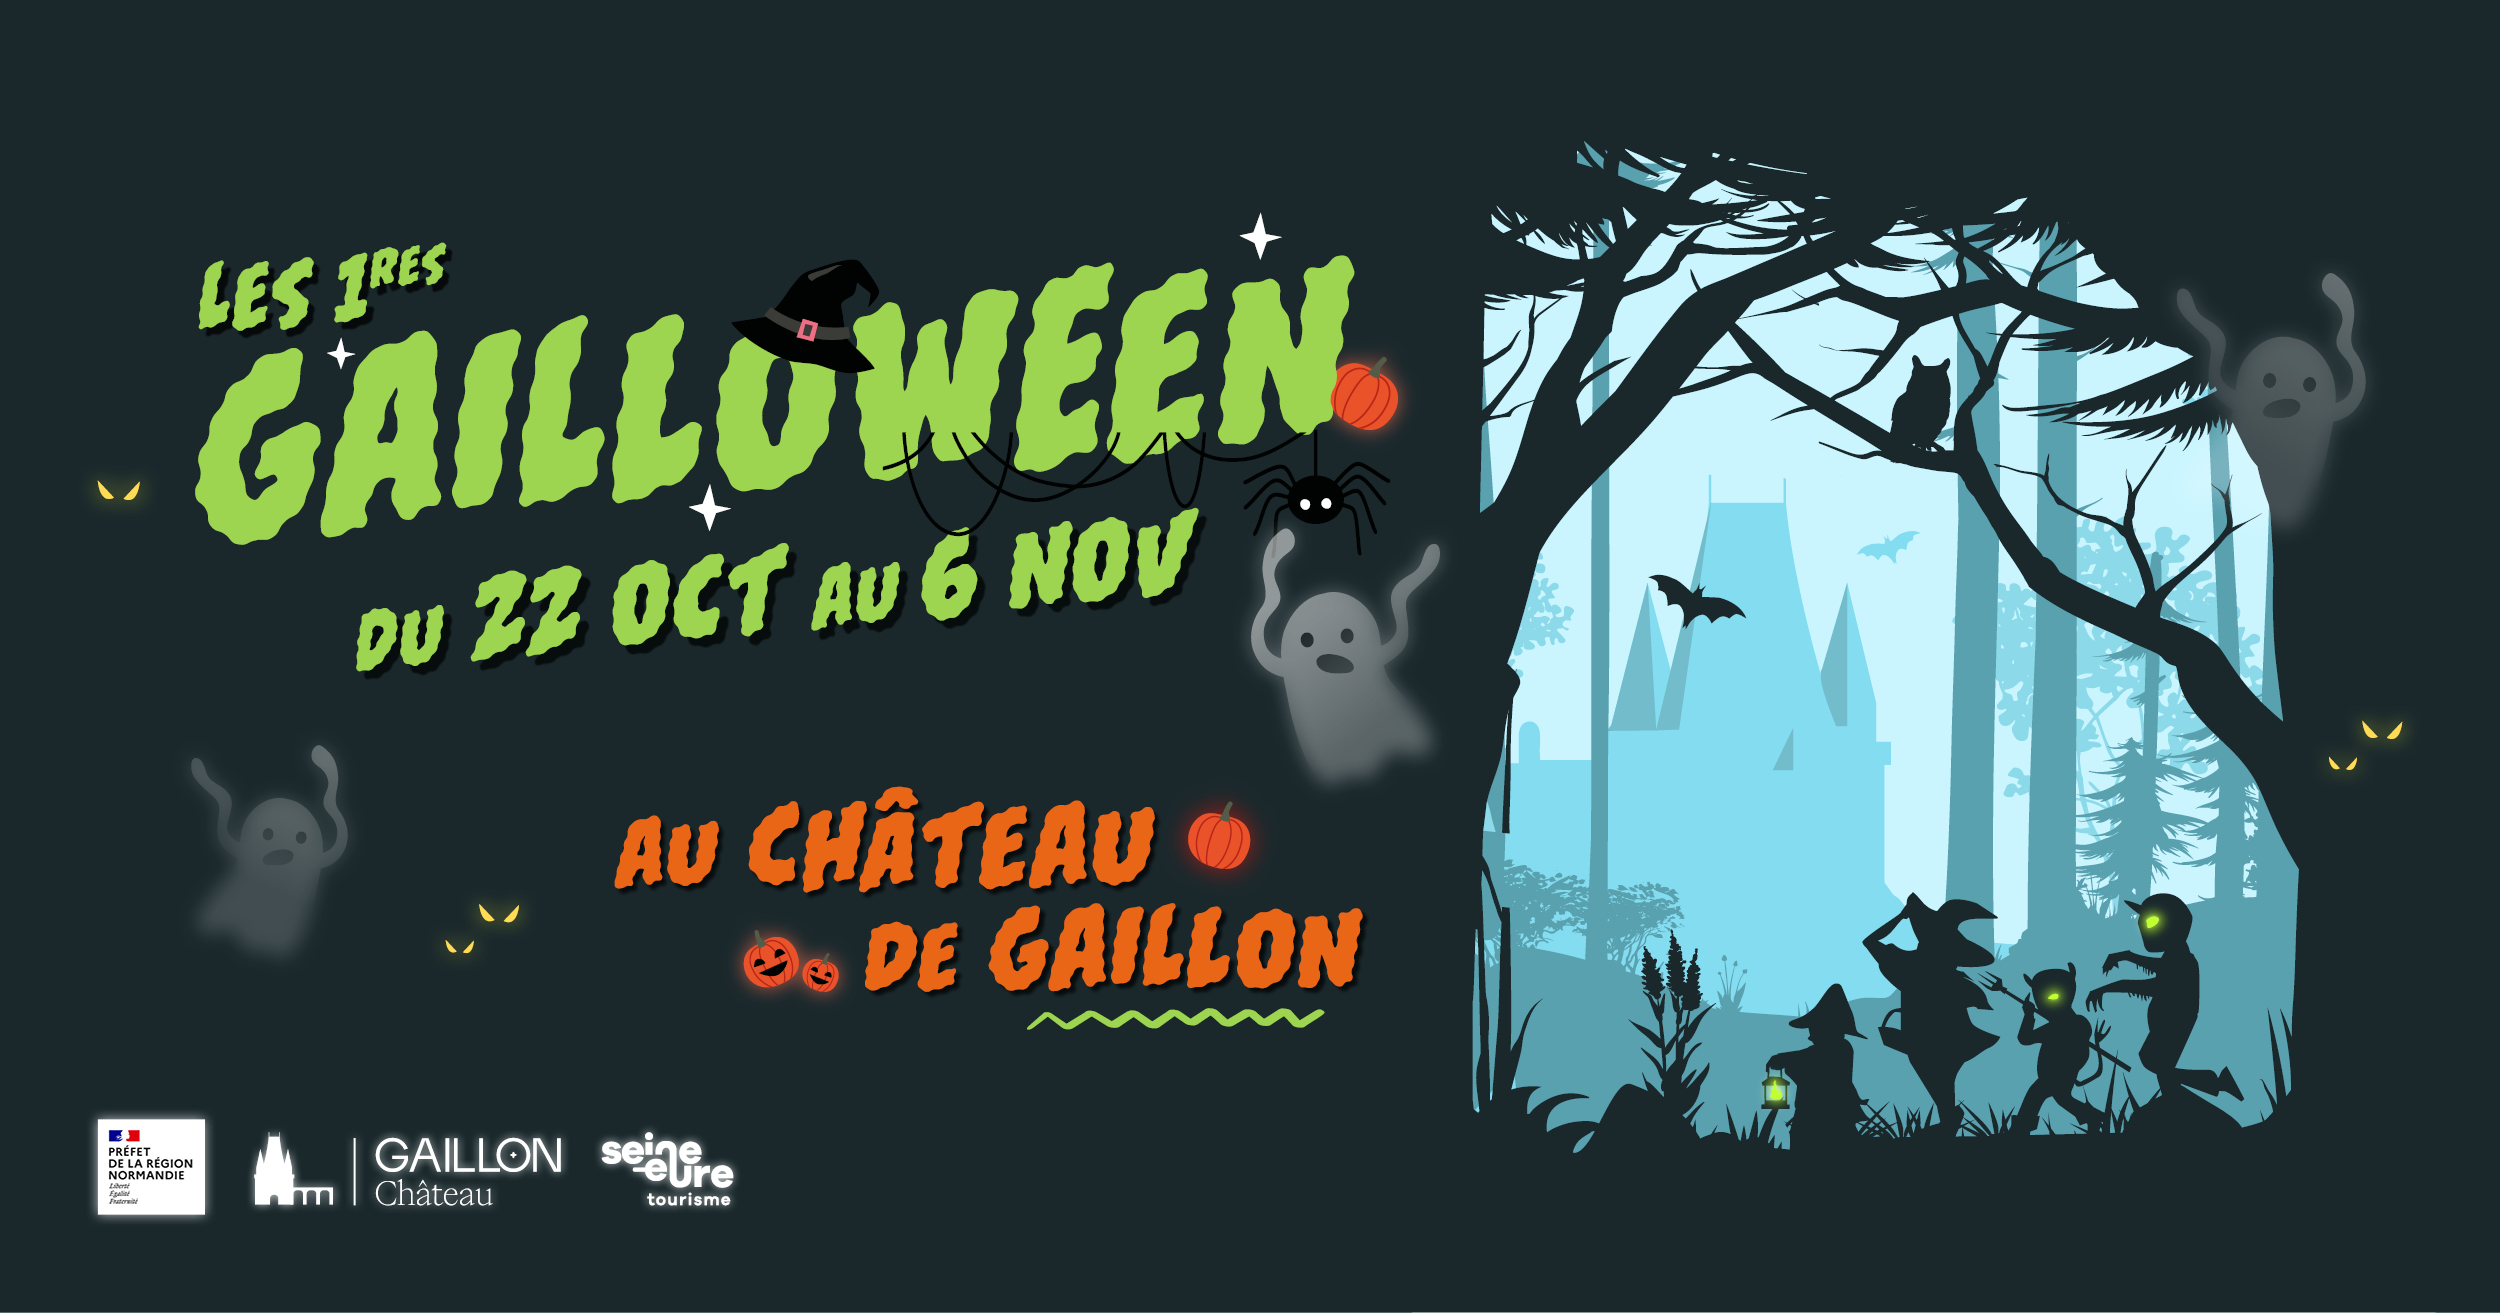 ChateauGaillon_Gailloween-couverture